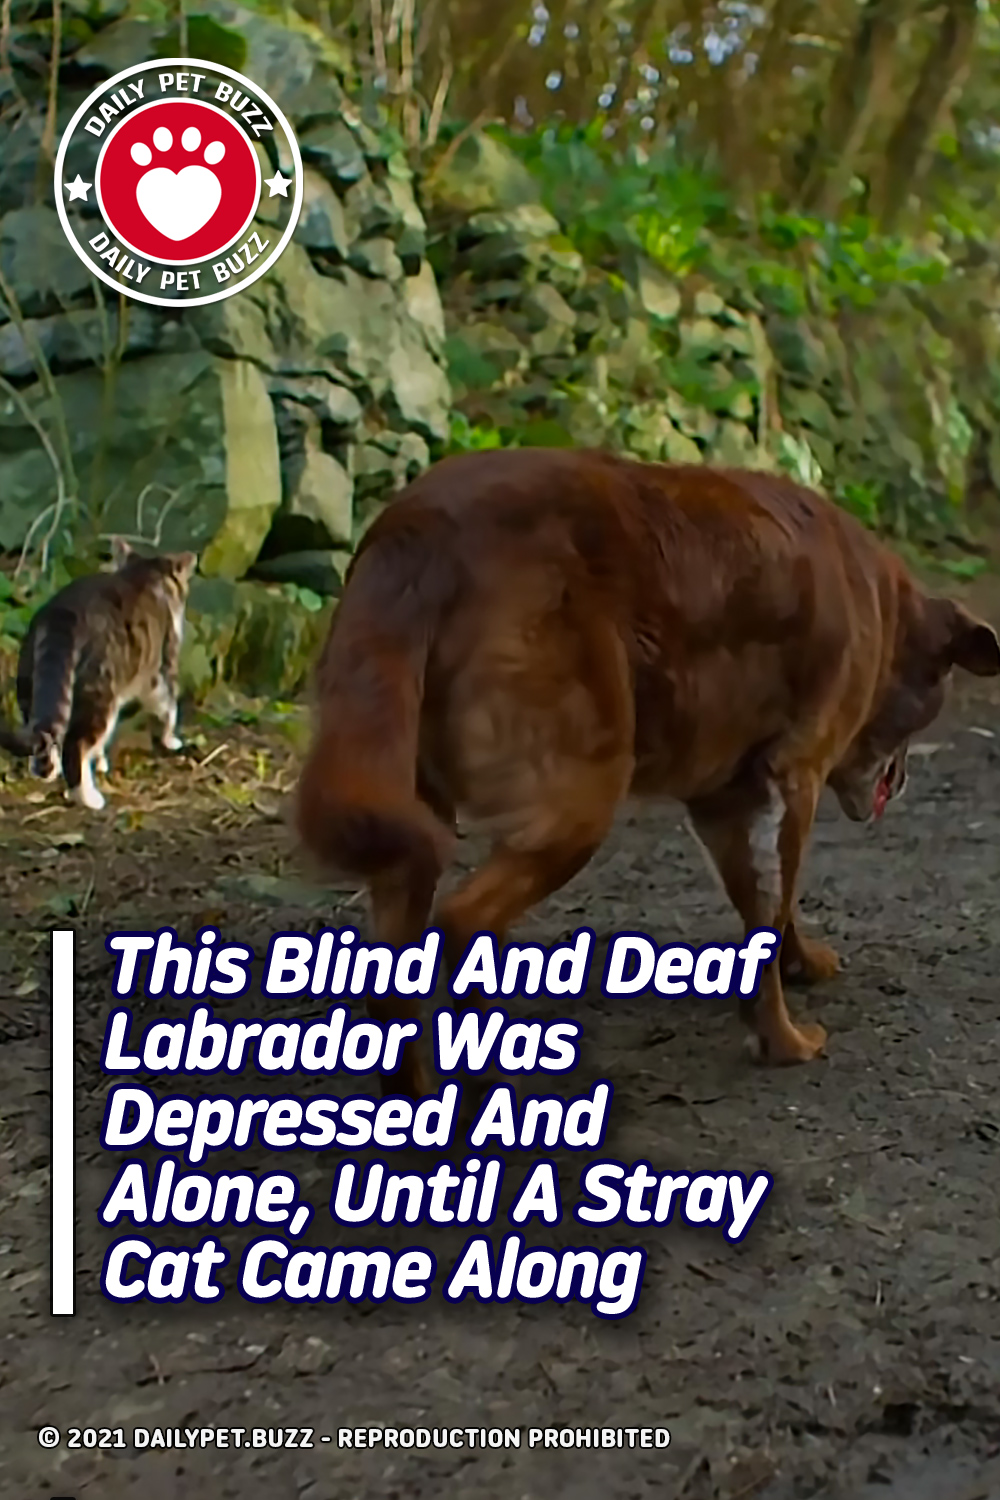 This Blind And Deaf Labrador Was Depressed And Alone Until A Stray Cat Came Along